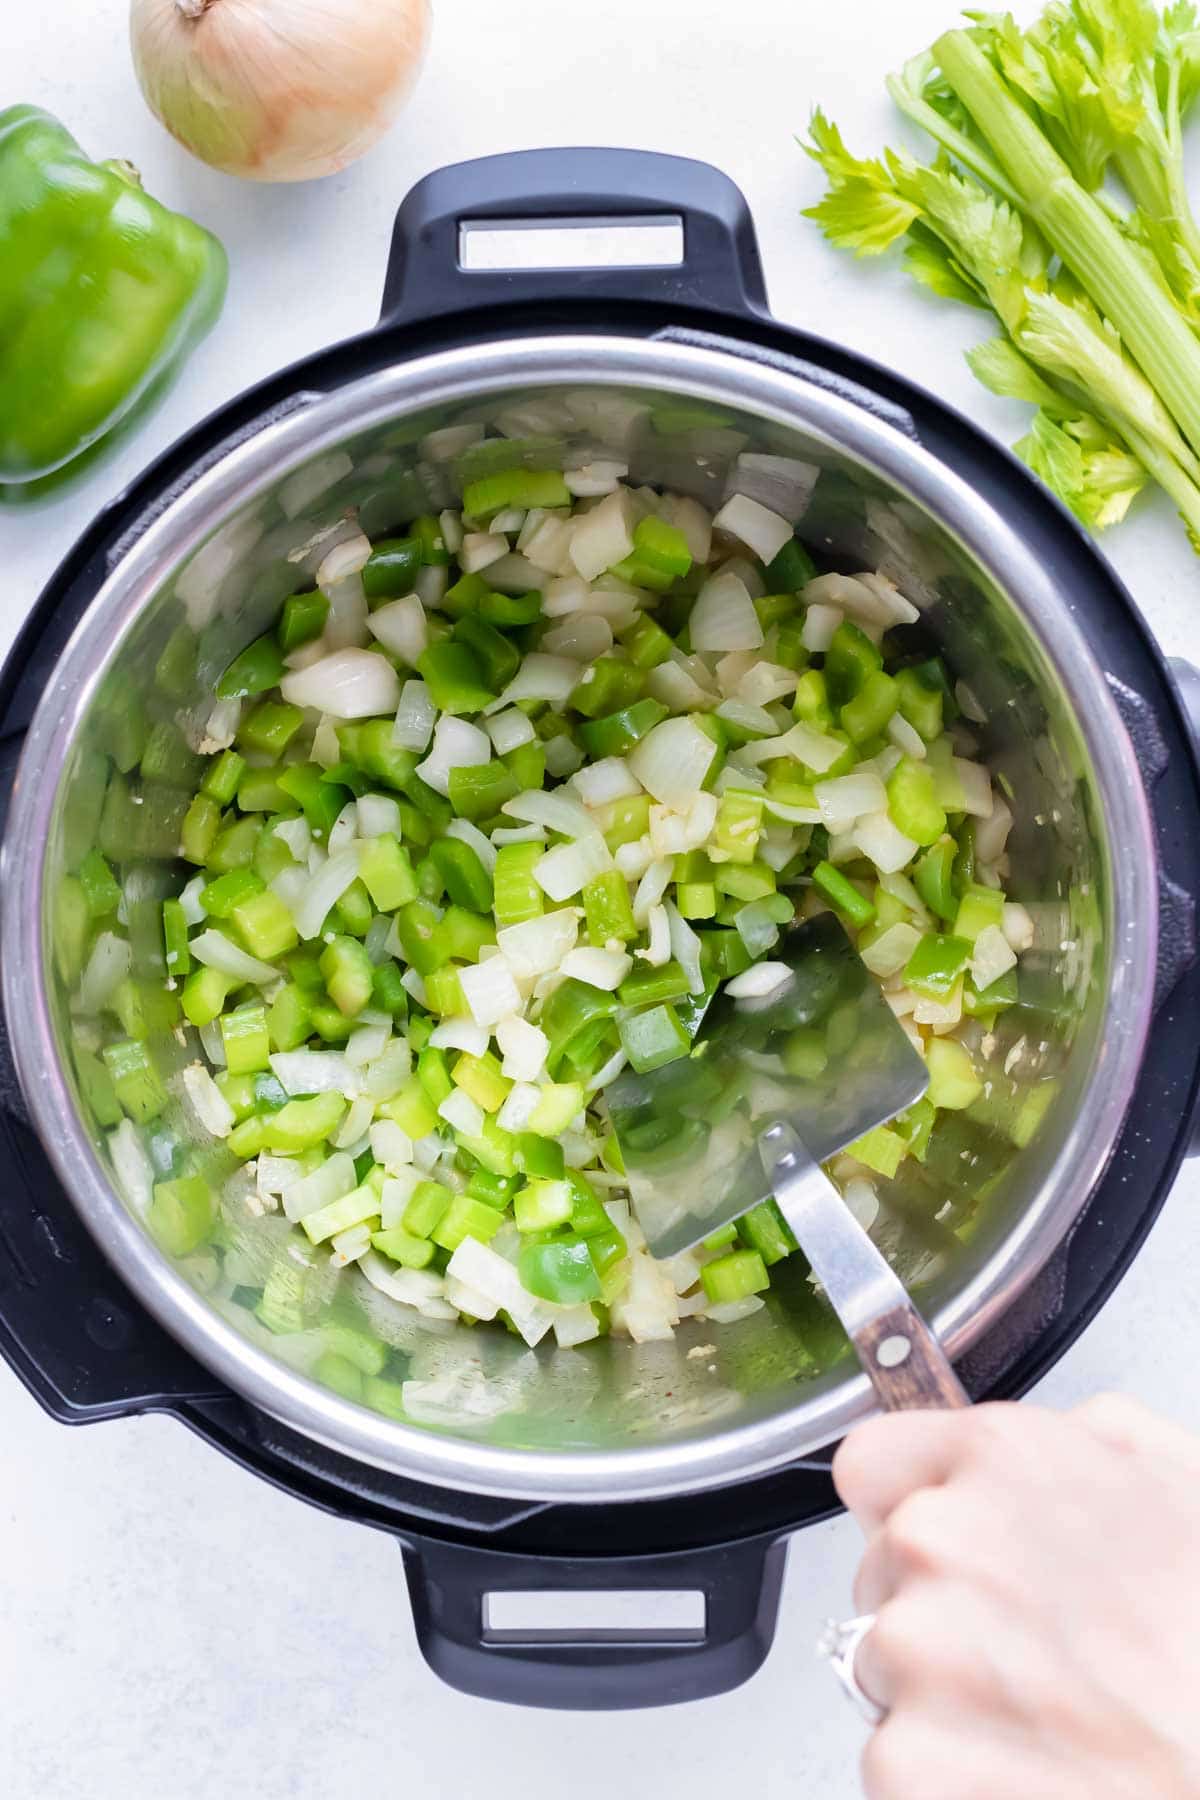 Bell peppers, onions, and celery are sautéed in the instant pot.